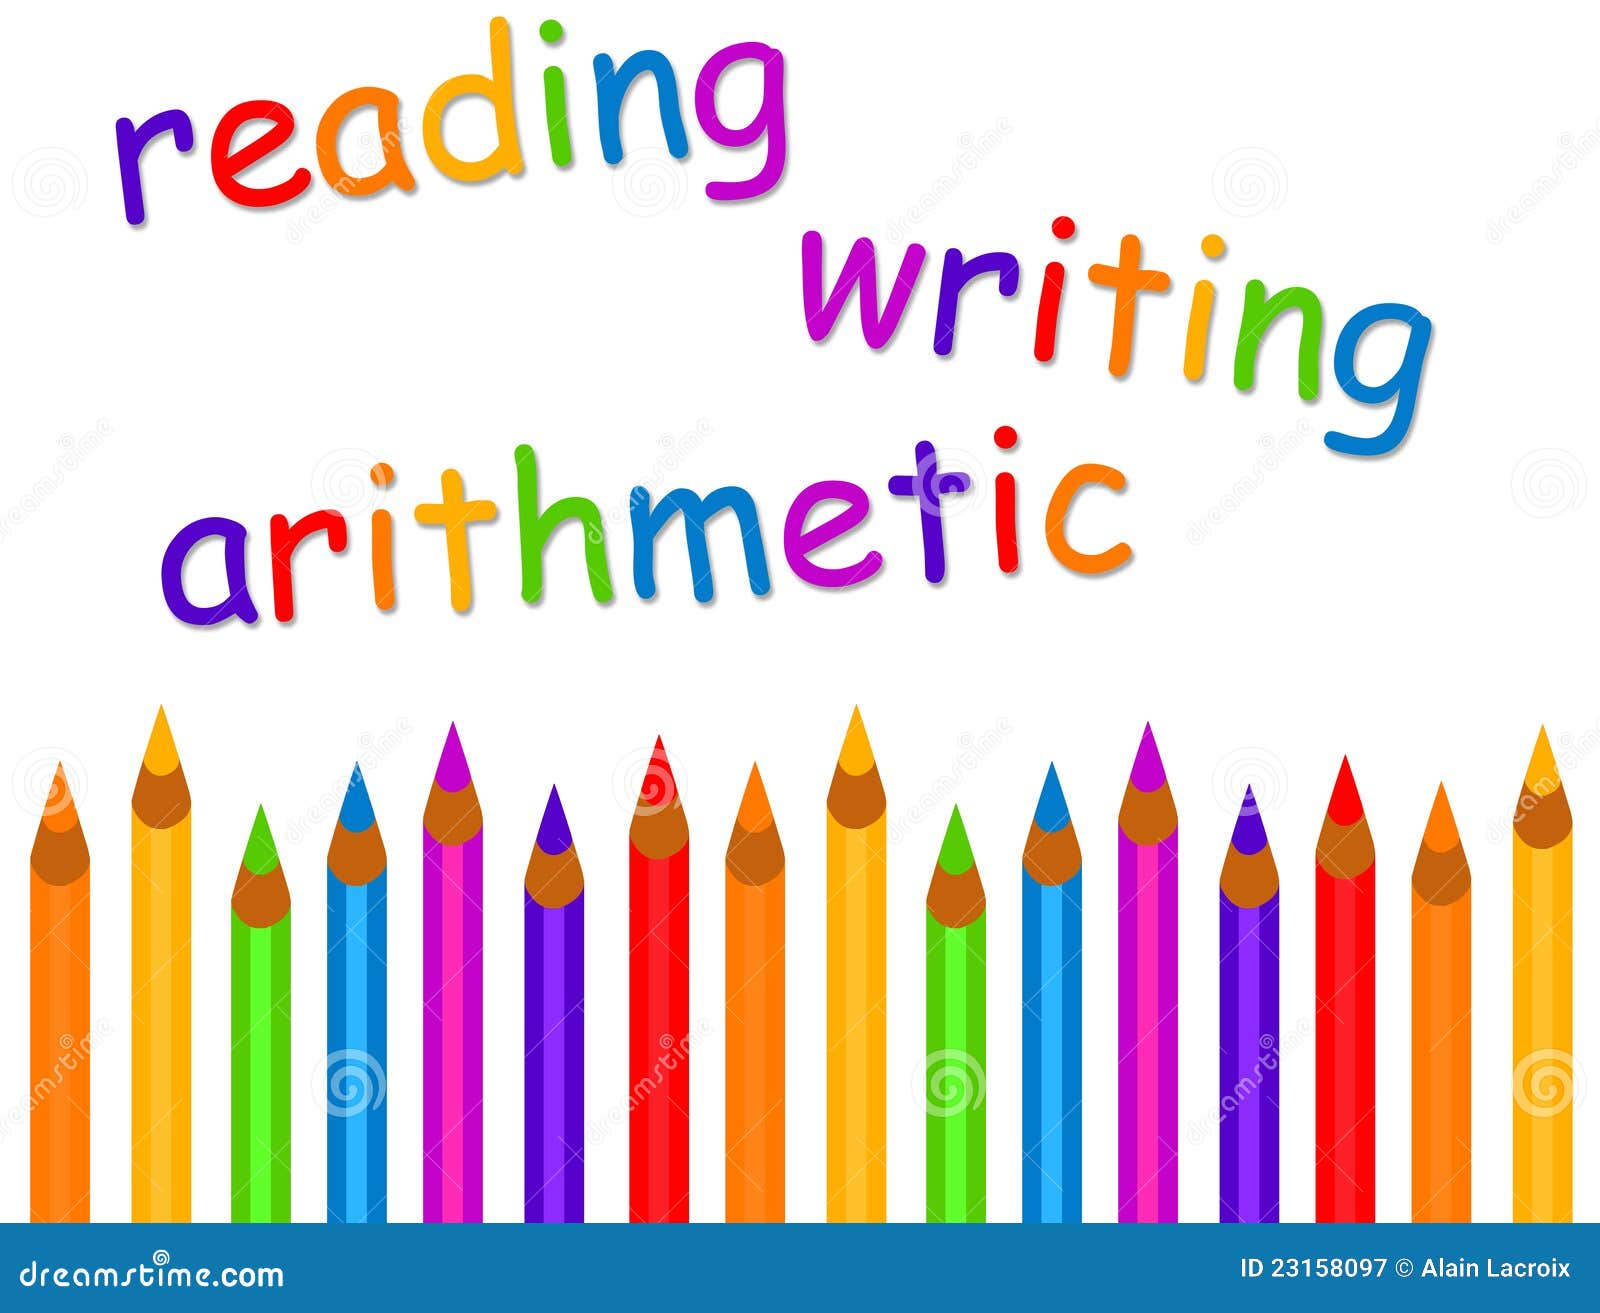 reading writing and arithmetic torrent